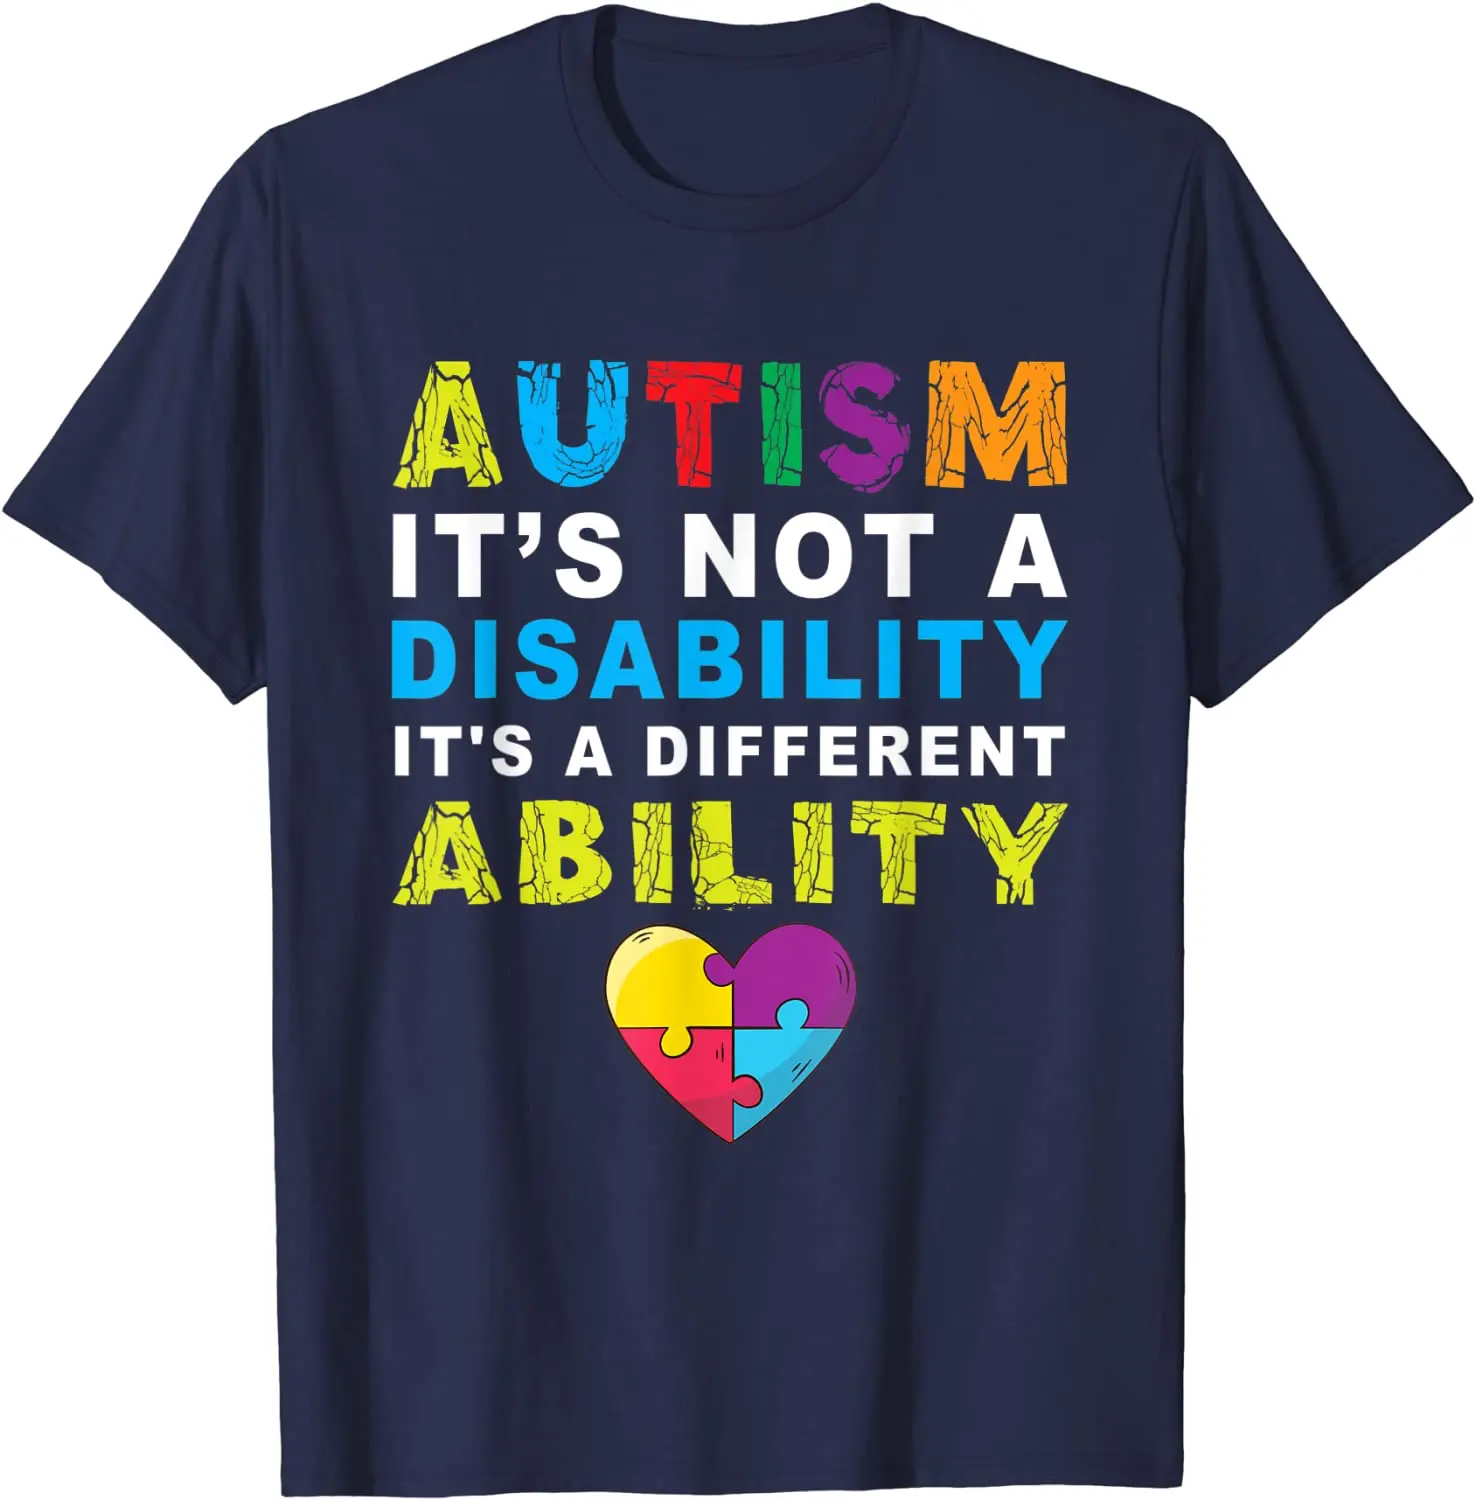 

Autism Speaks Shirt Autistic Awareness Gift For Men Women Design Tops T Shirt for Students Cotton Top T-shirts Summer Popular